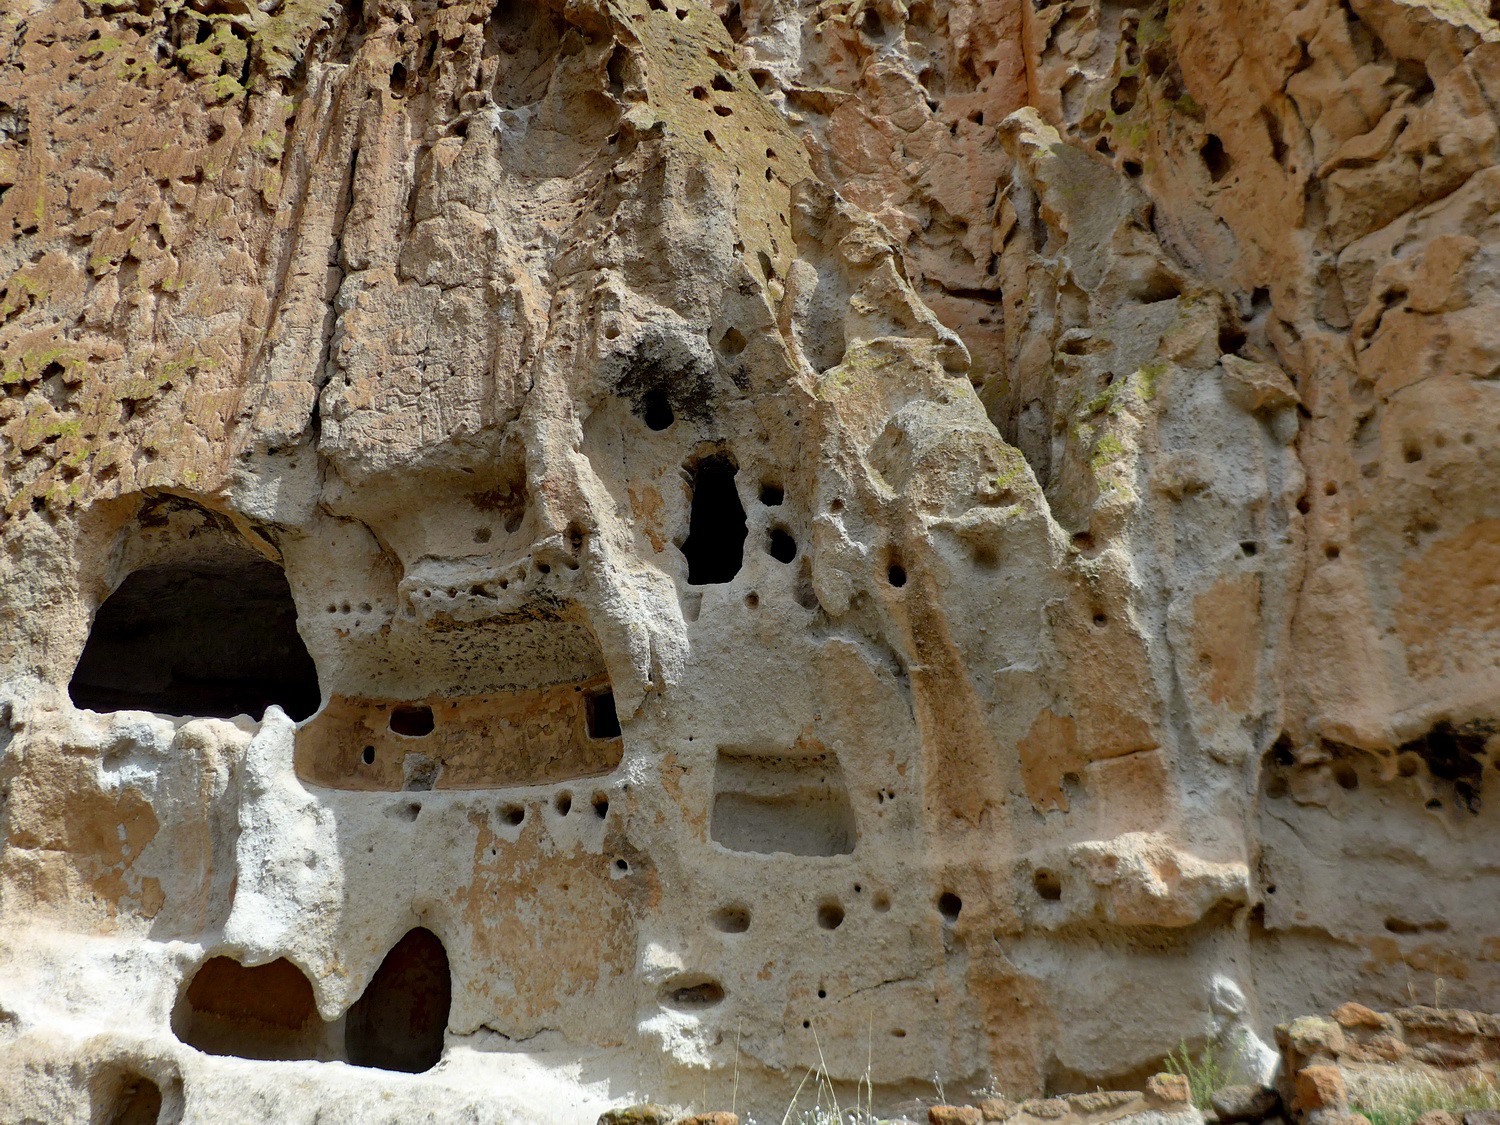 More cave dwellings